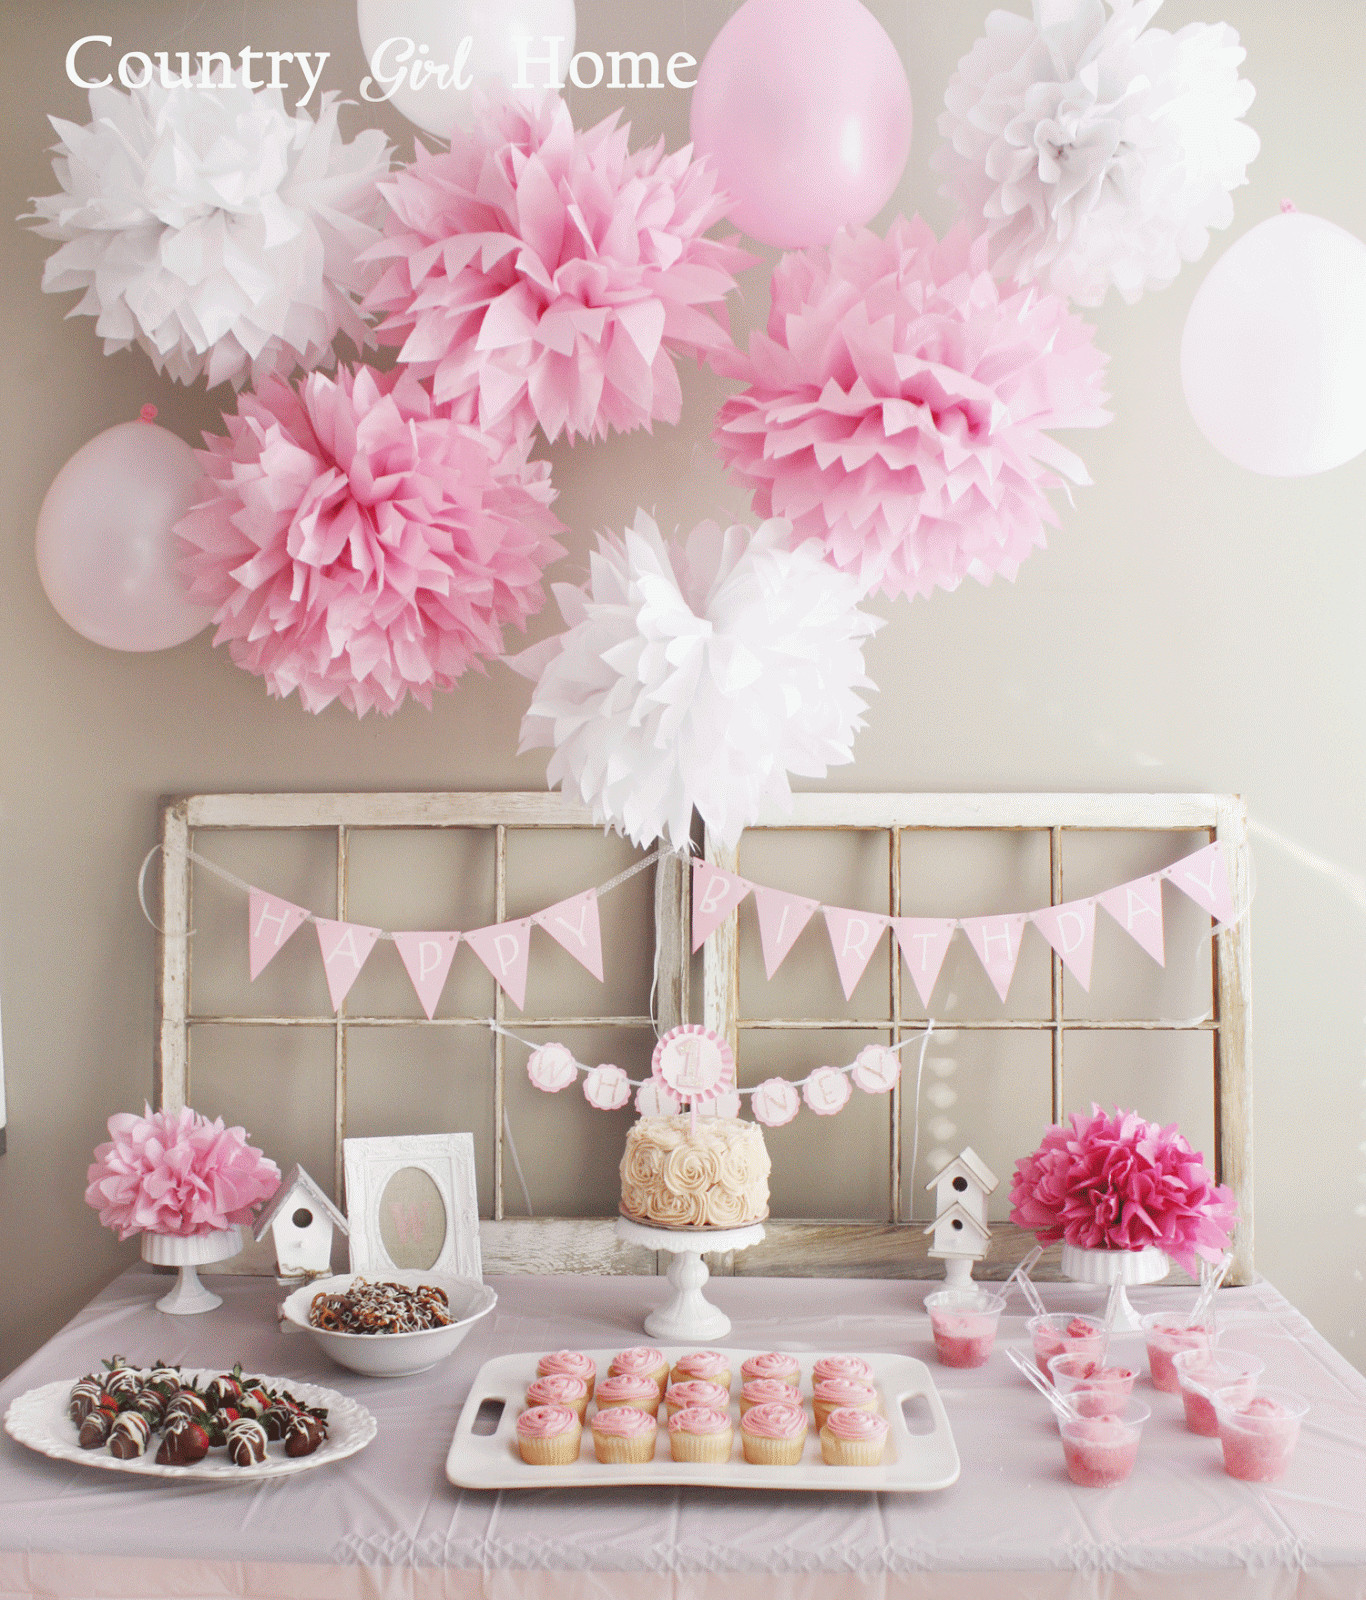 Birthday Party Decoration Ideas For Girl
 COUNTRY GIRL HOME 1st Birthday